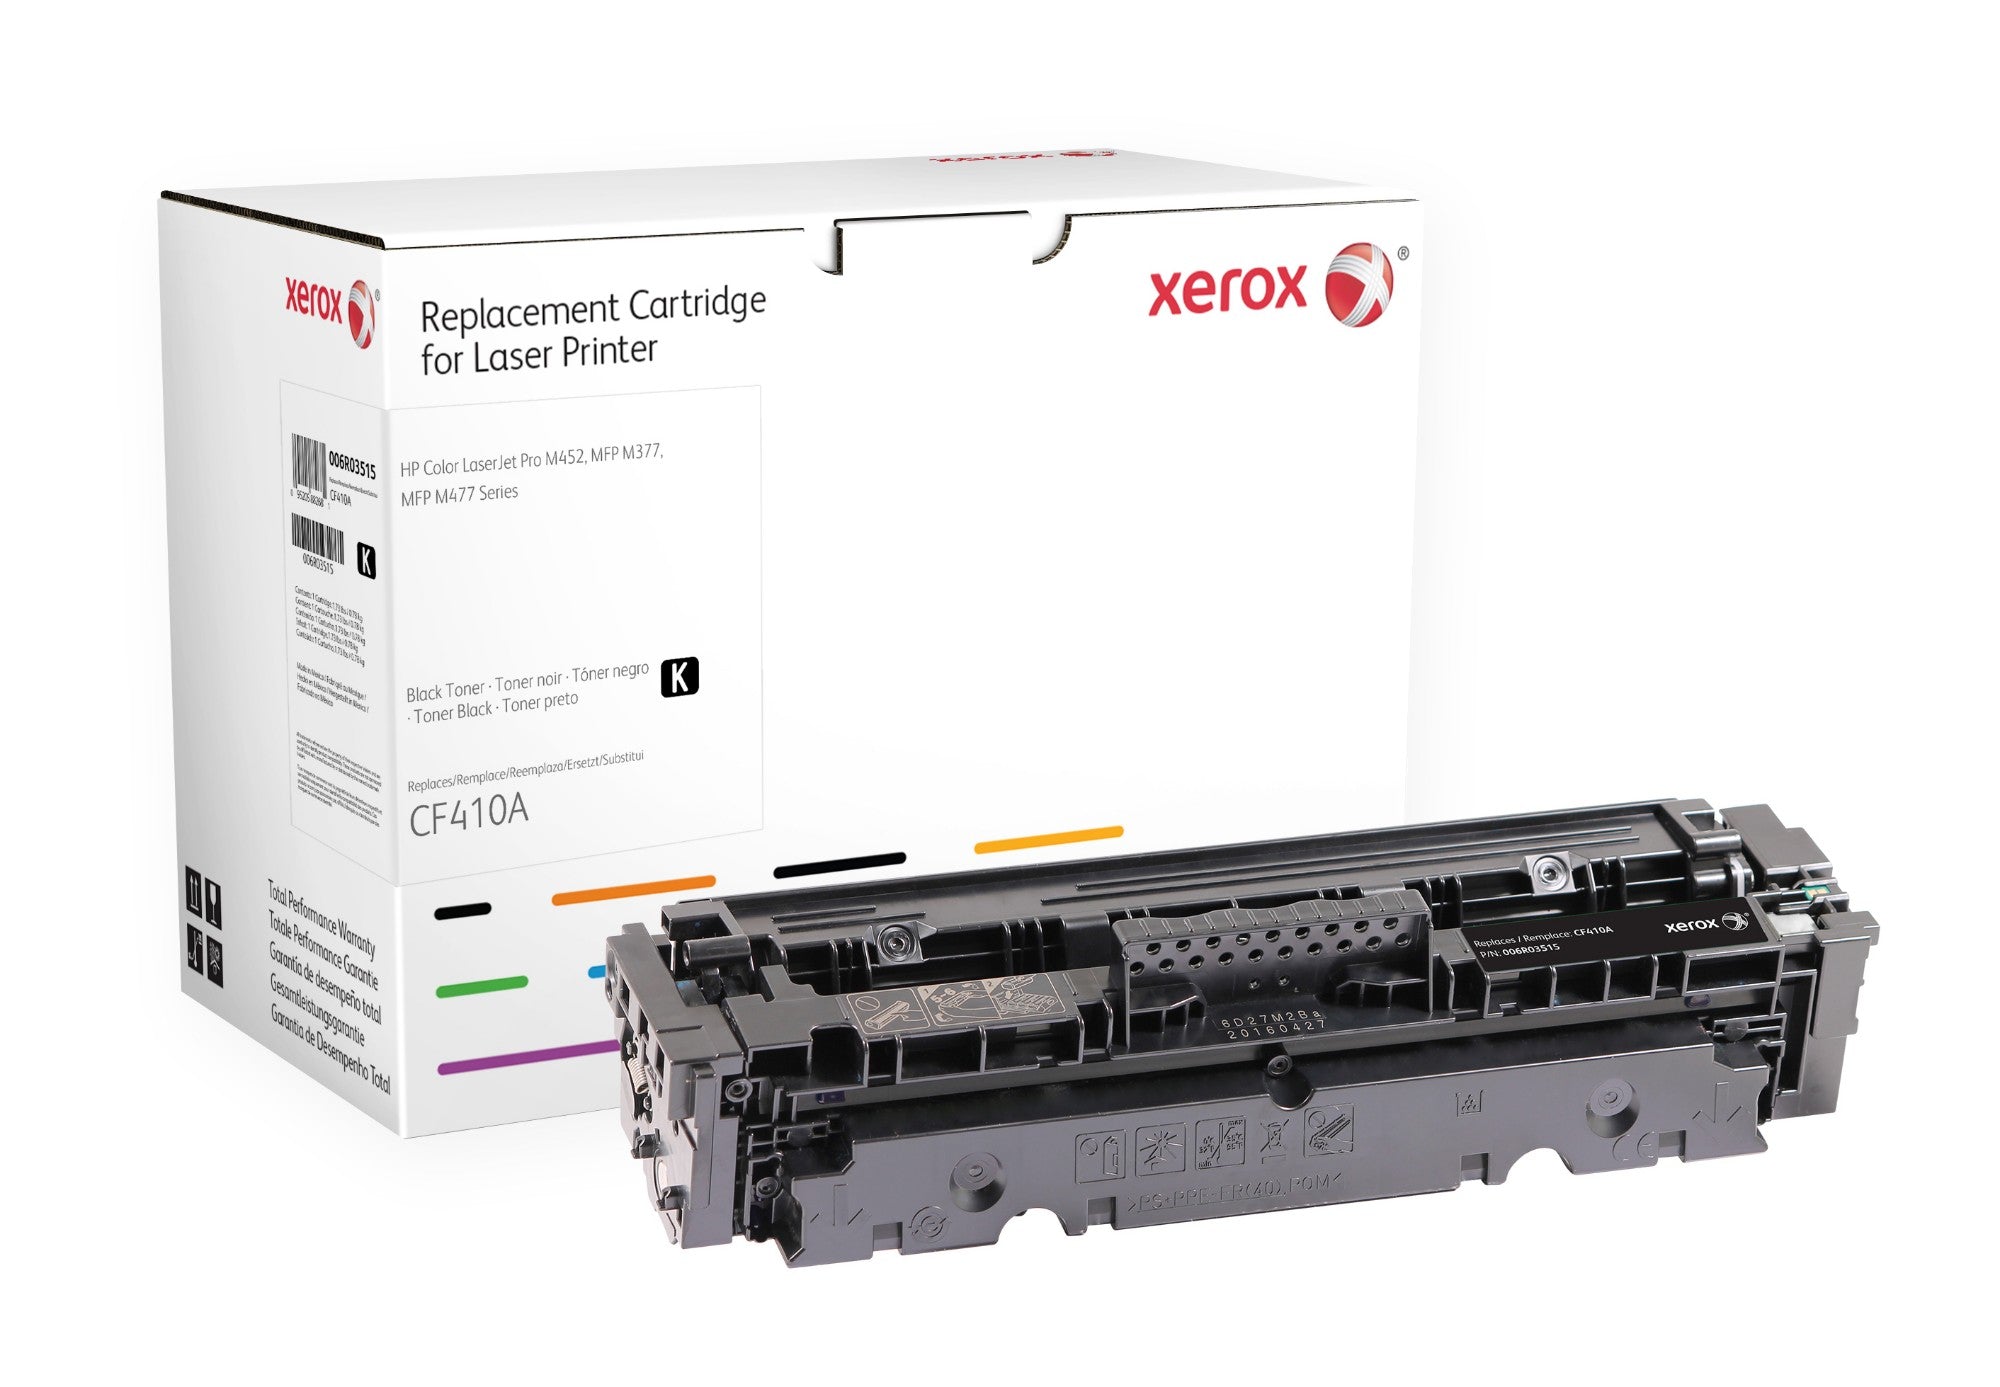 Xerox 006R03515 Toner cartridge black, 2.3K pages (replaces HP 410A/CF410A) for HP Pro M 452